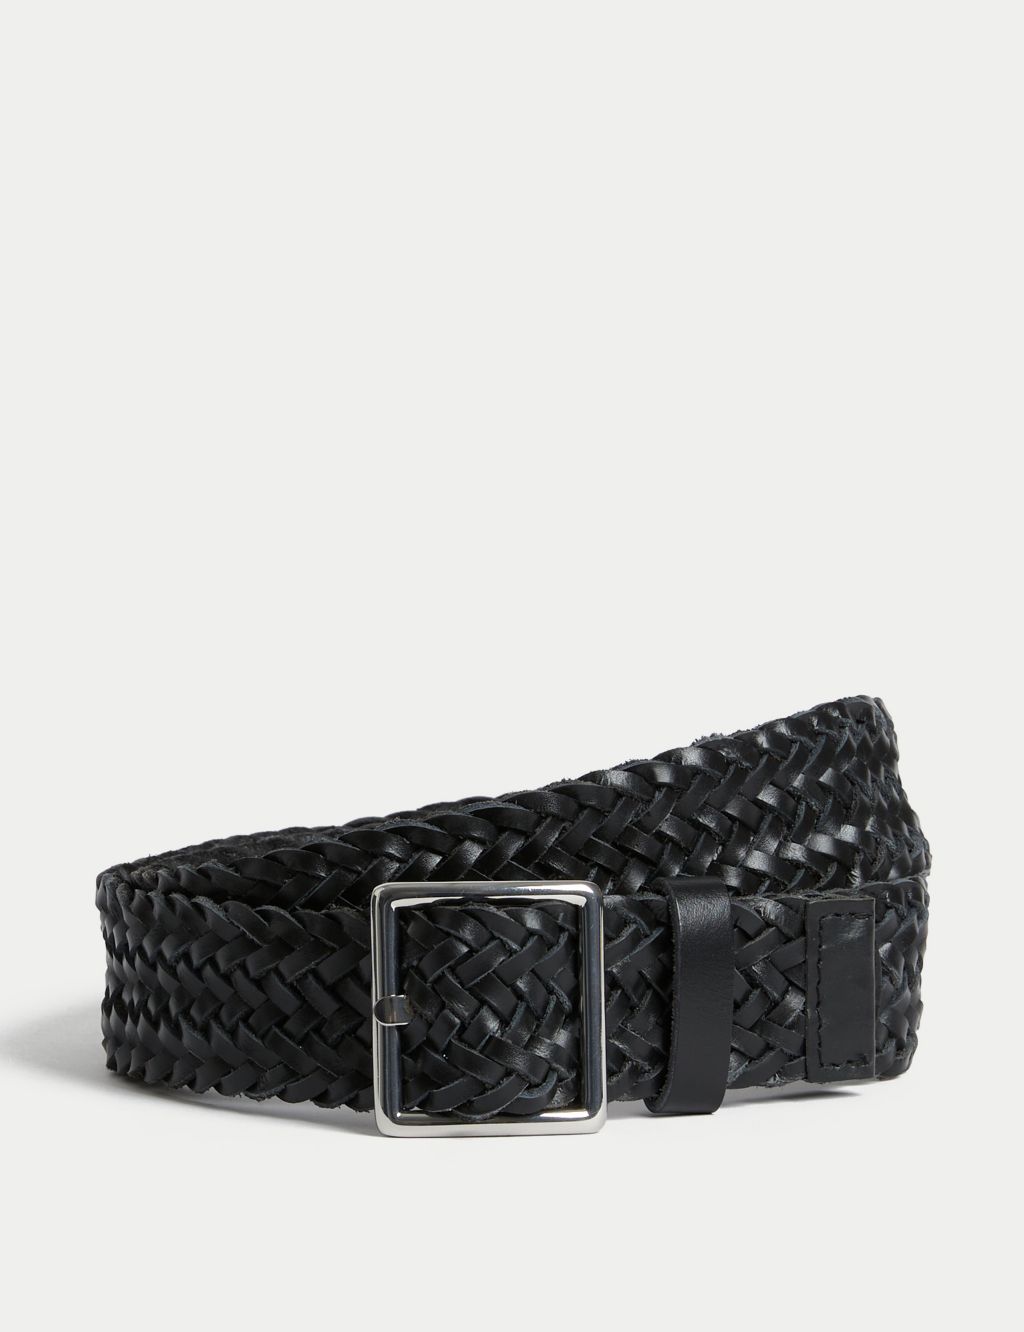 Leather Woven Jeans Belt image 1